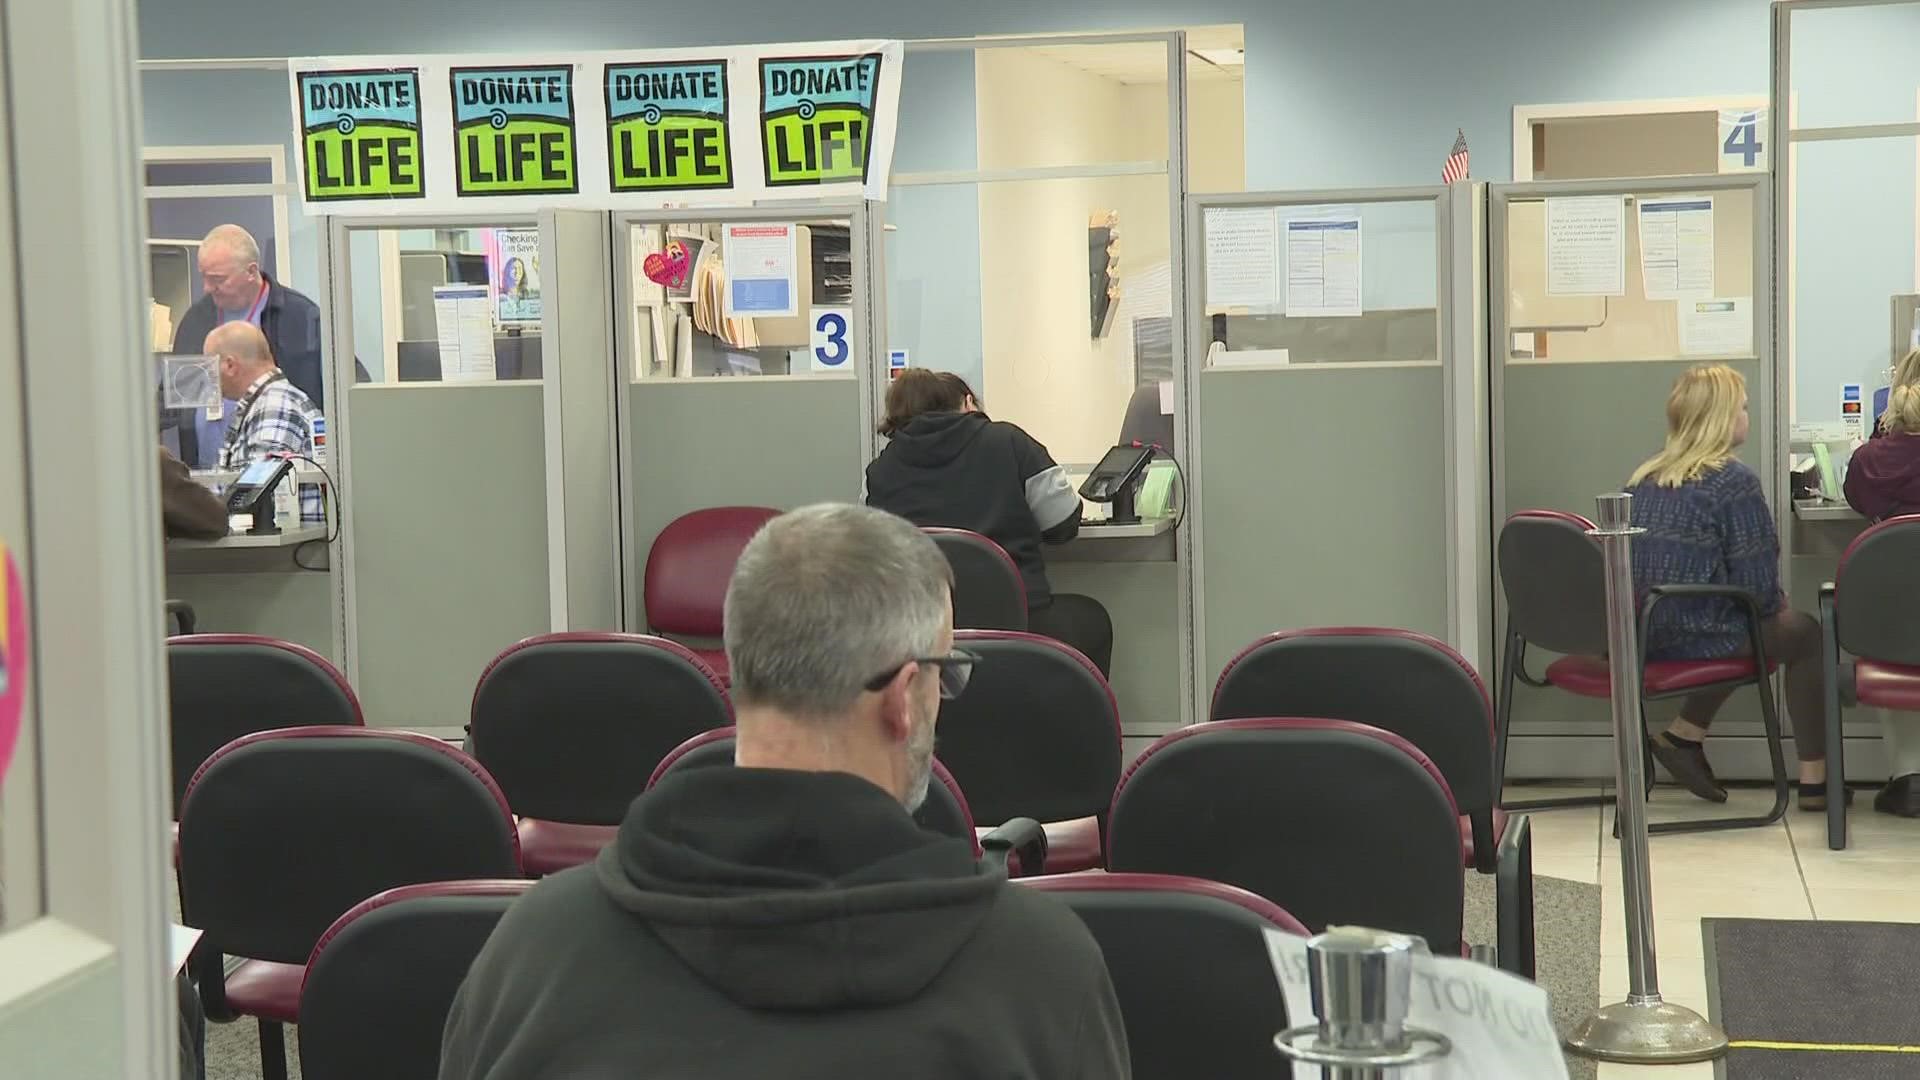 The threat was potentially from an aggrieved customer, according to the Maine Bureau of Motor Vehicles.